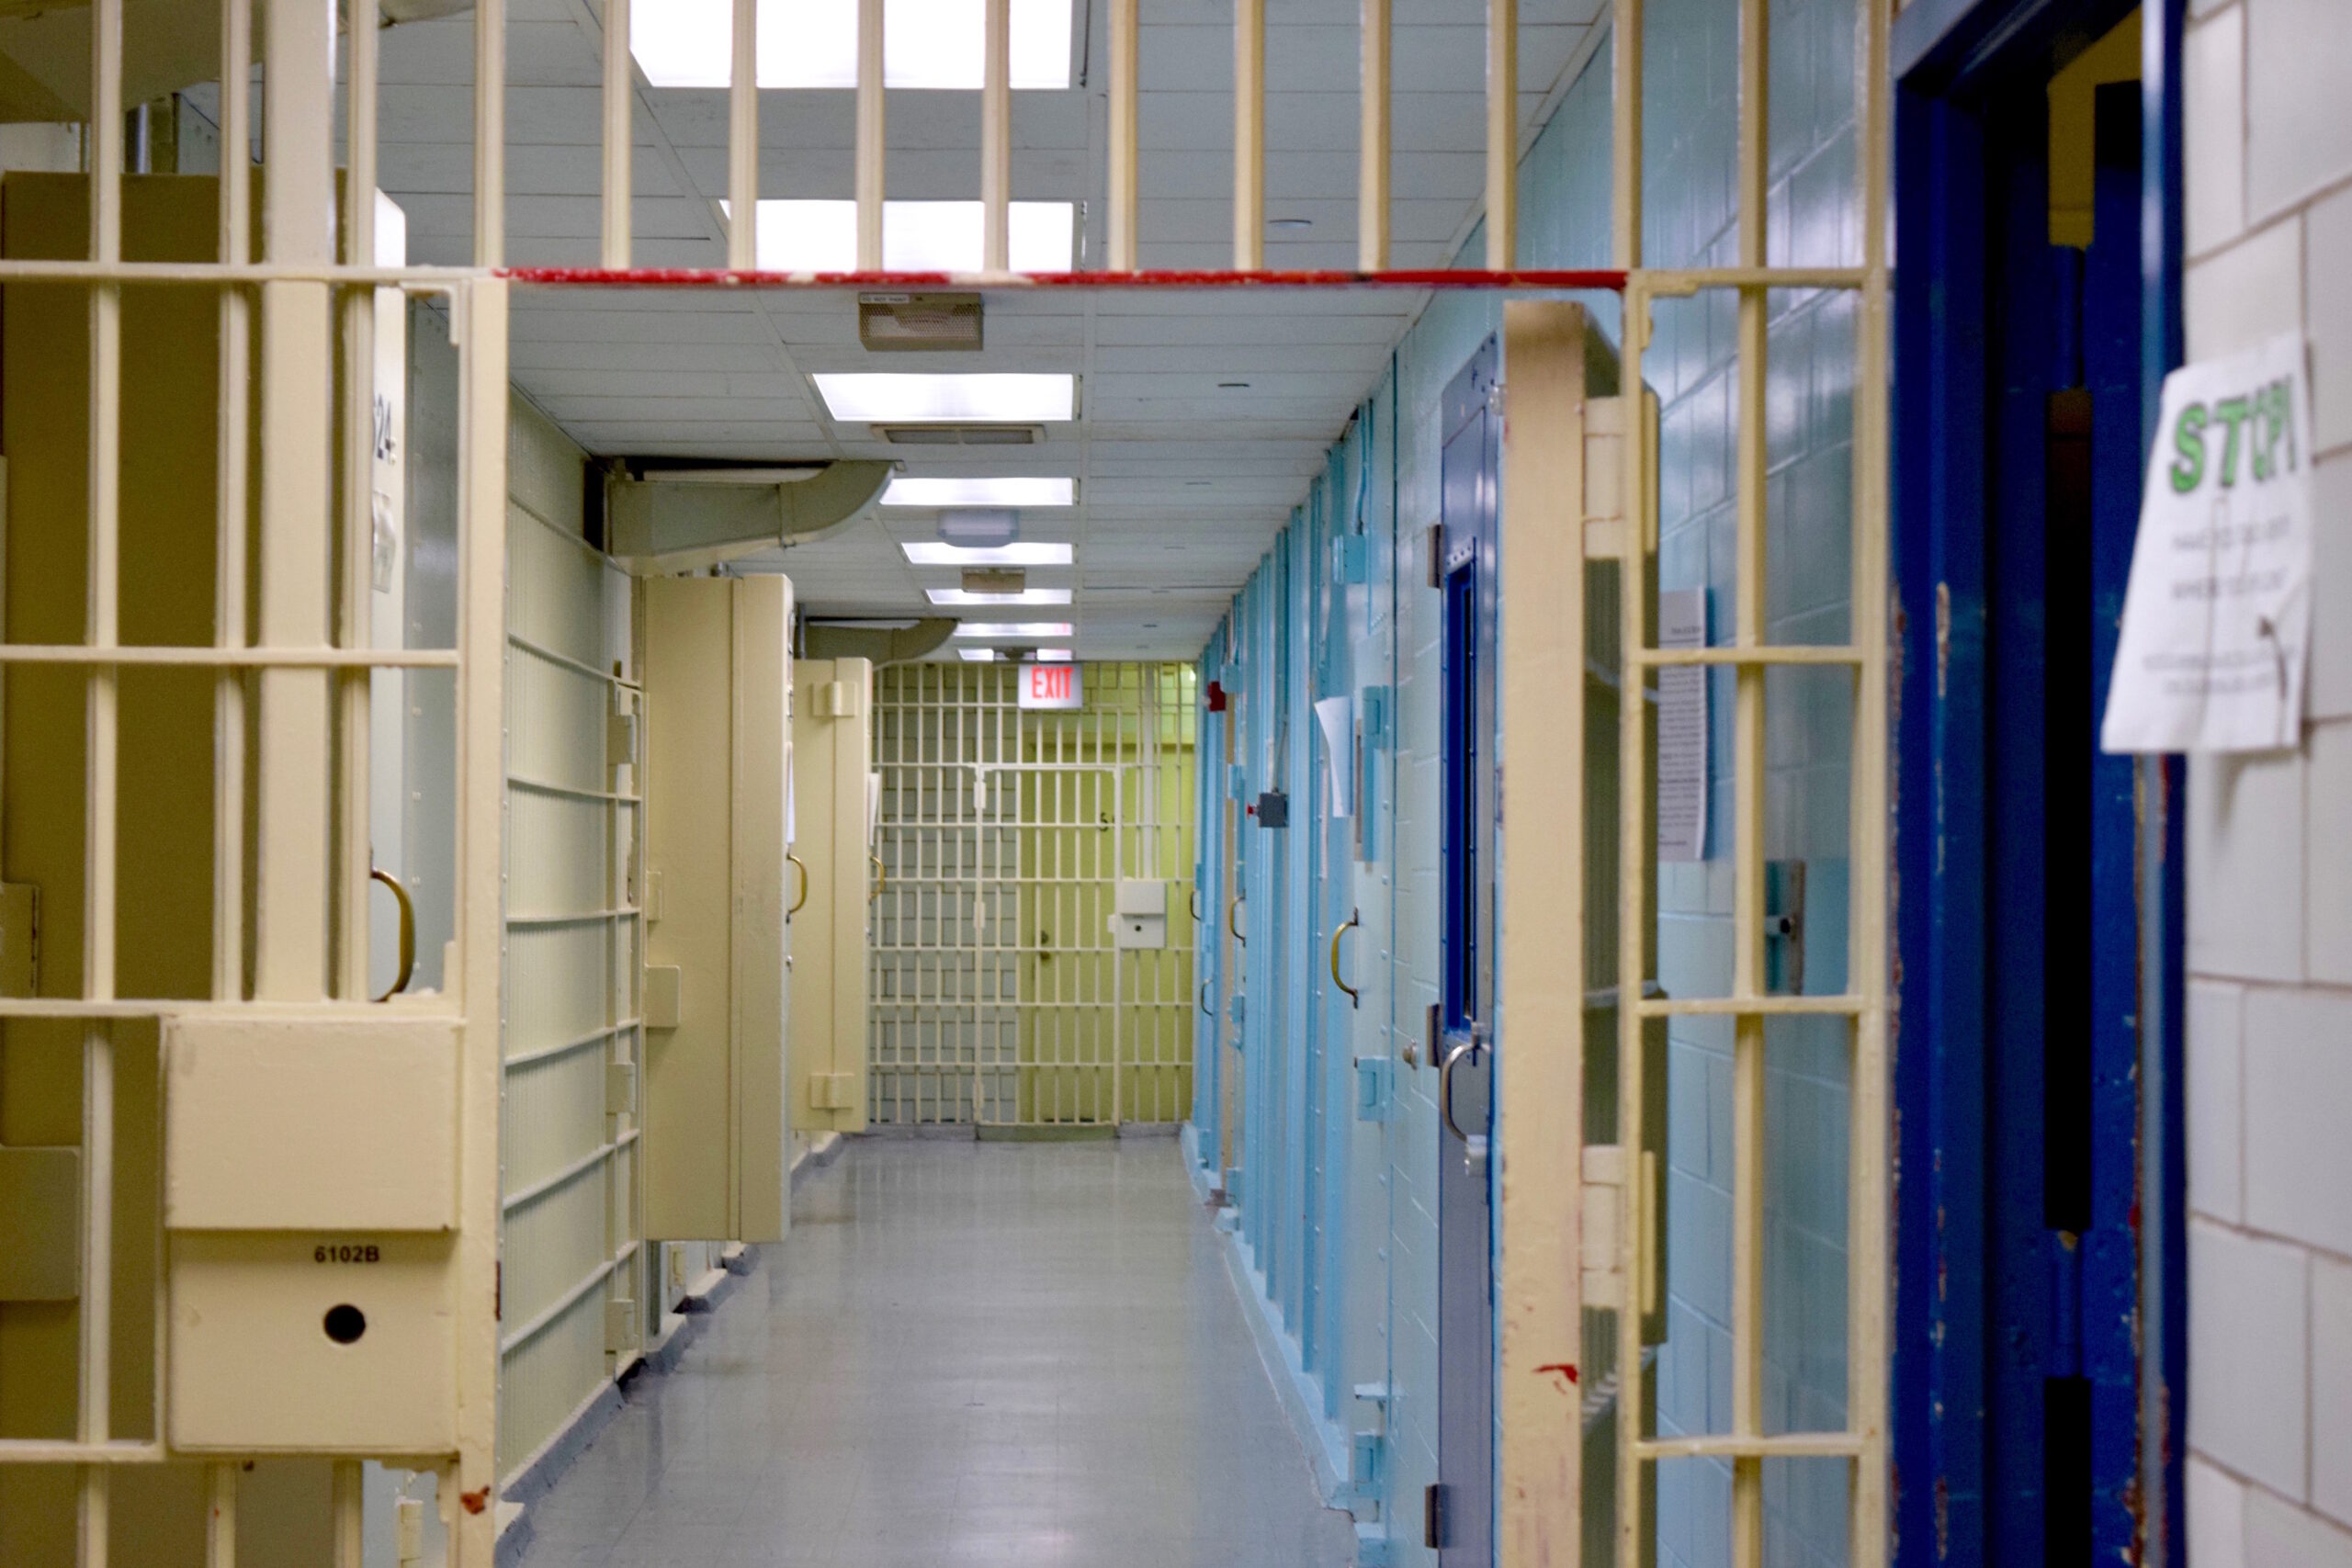 A hallway in the Dane County Jail